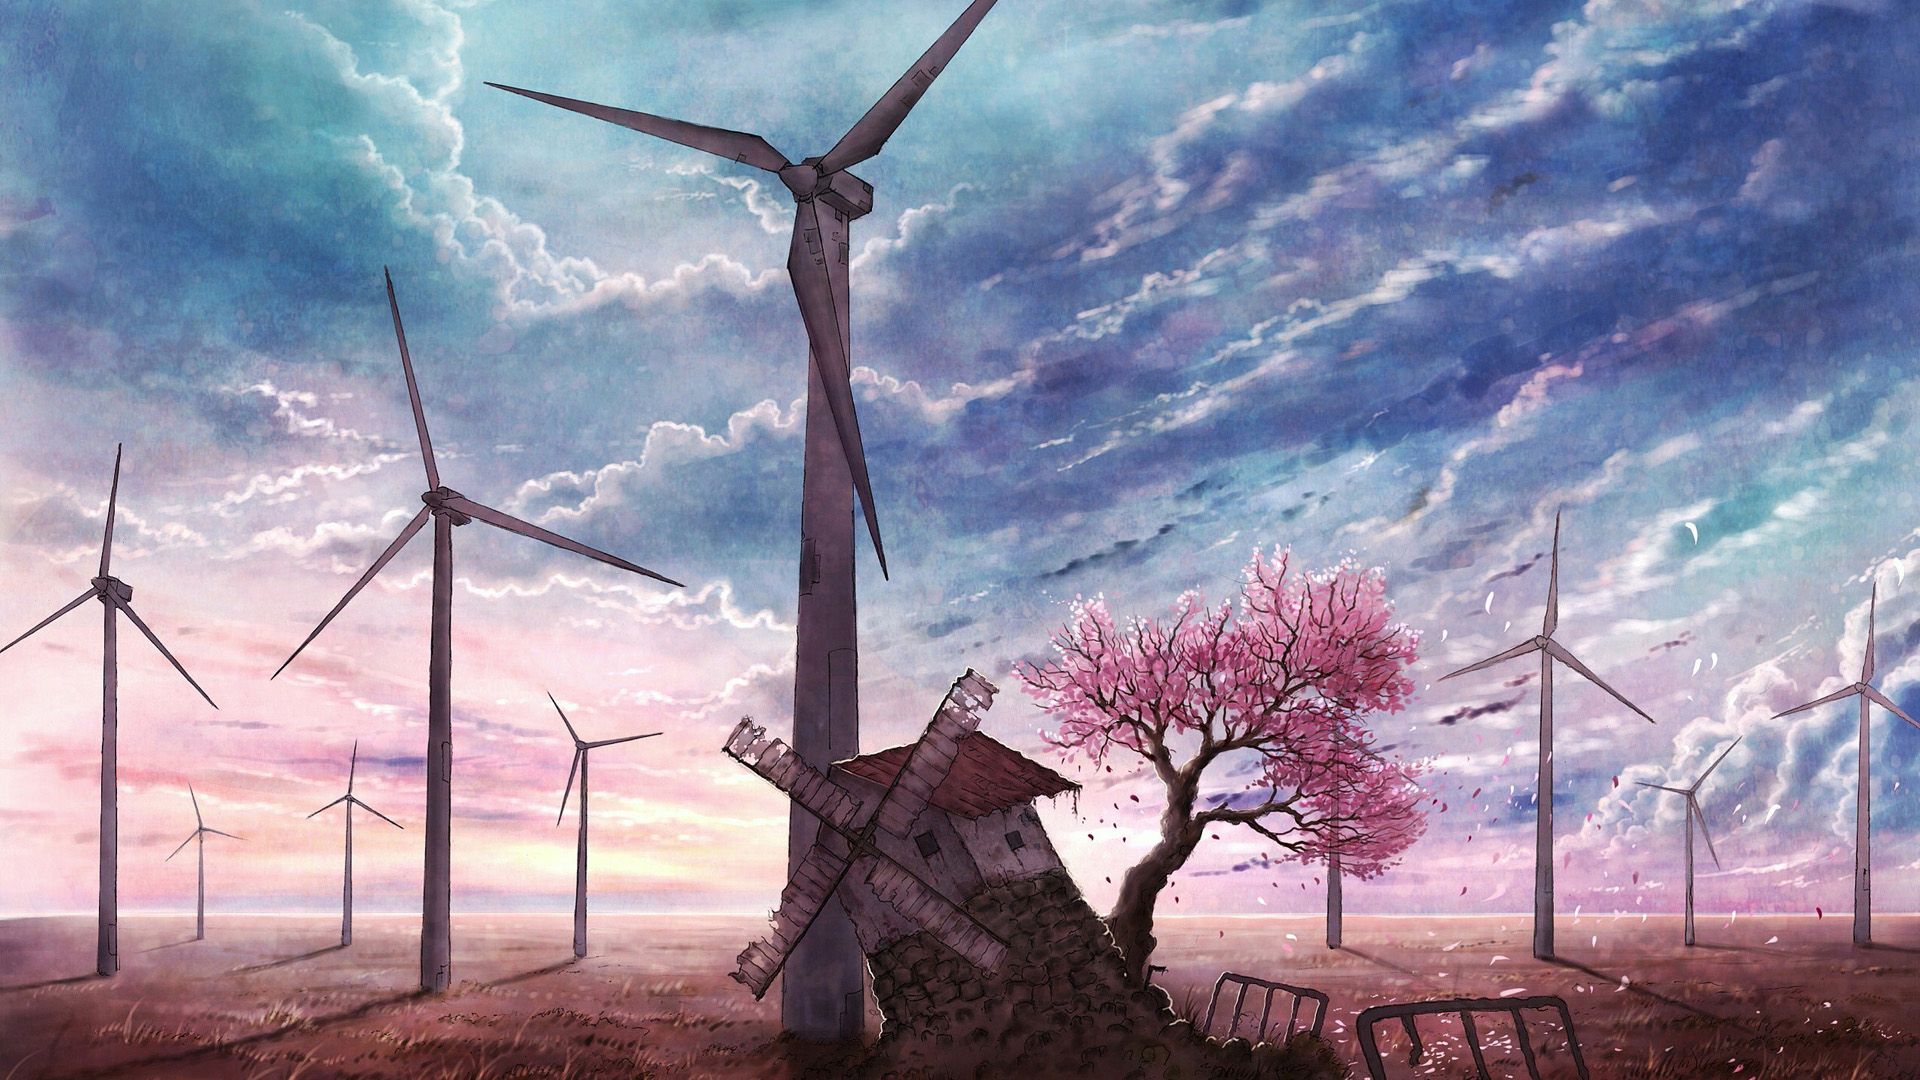 Pink Anime Scenery Wallpapers